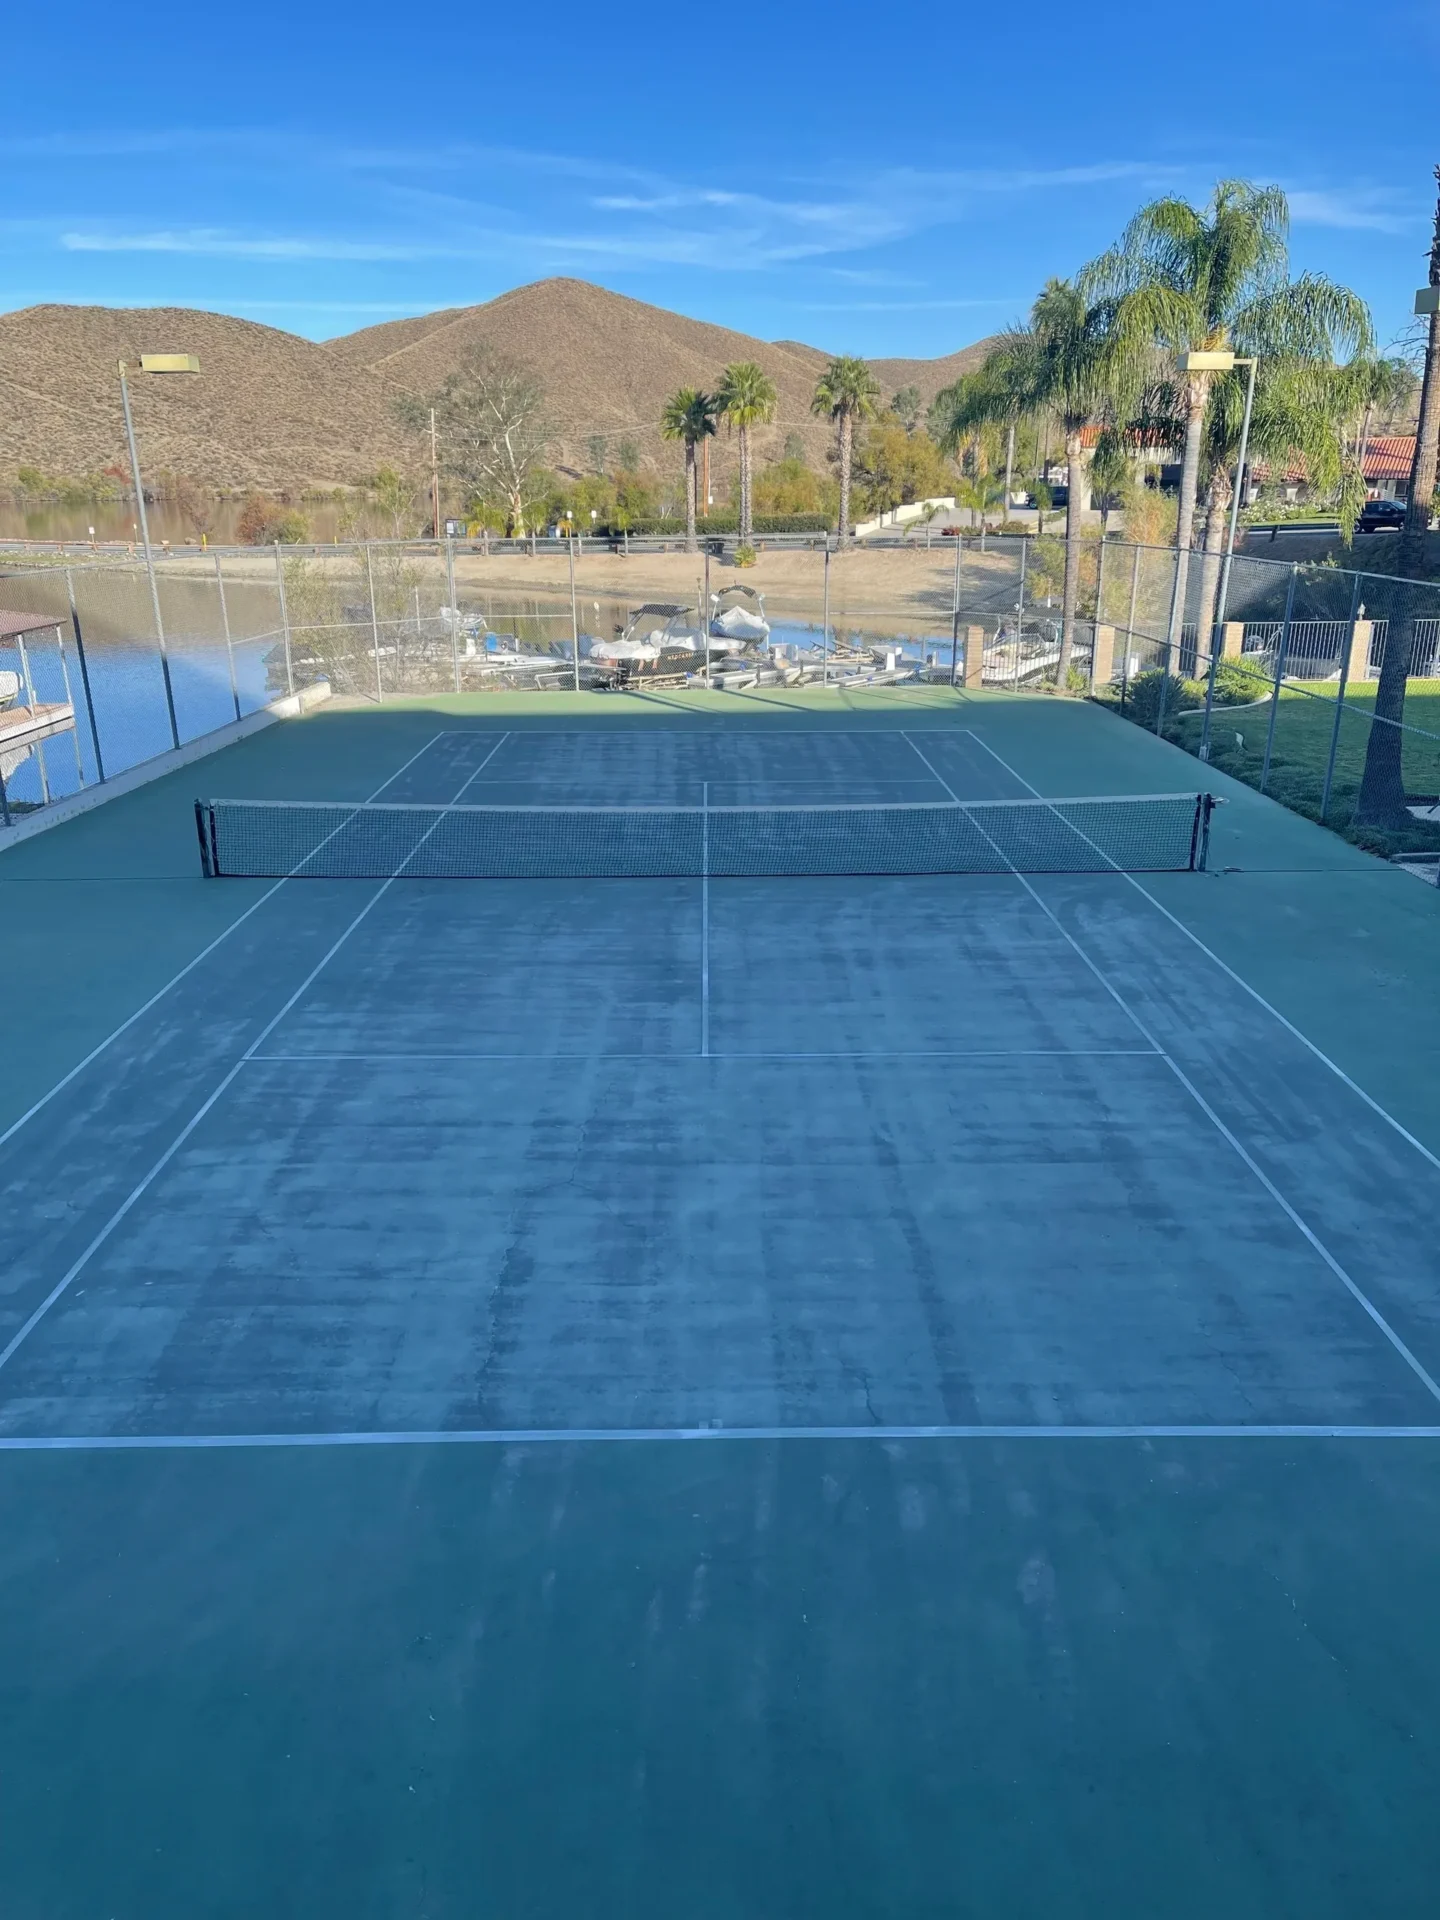 A tennis court with two rackets and one ball